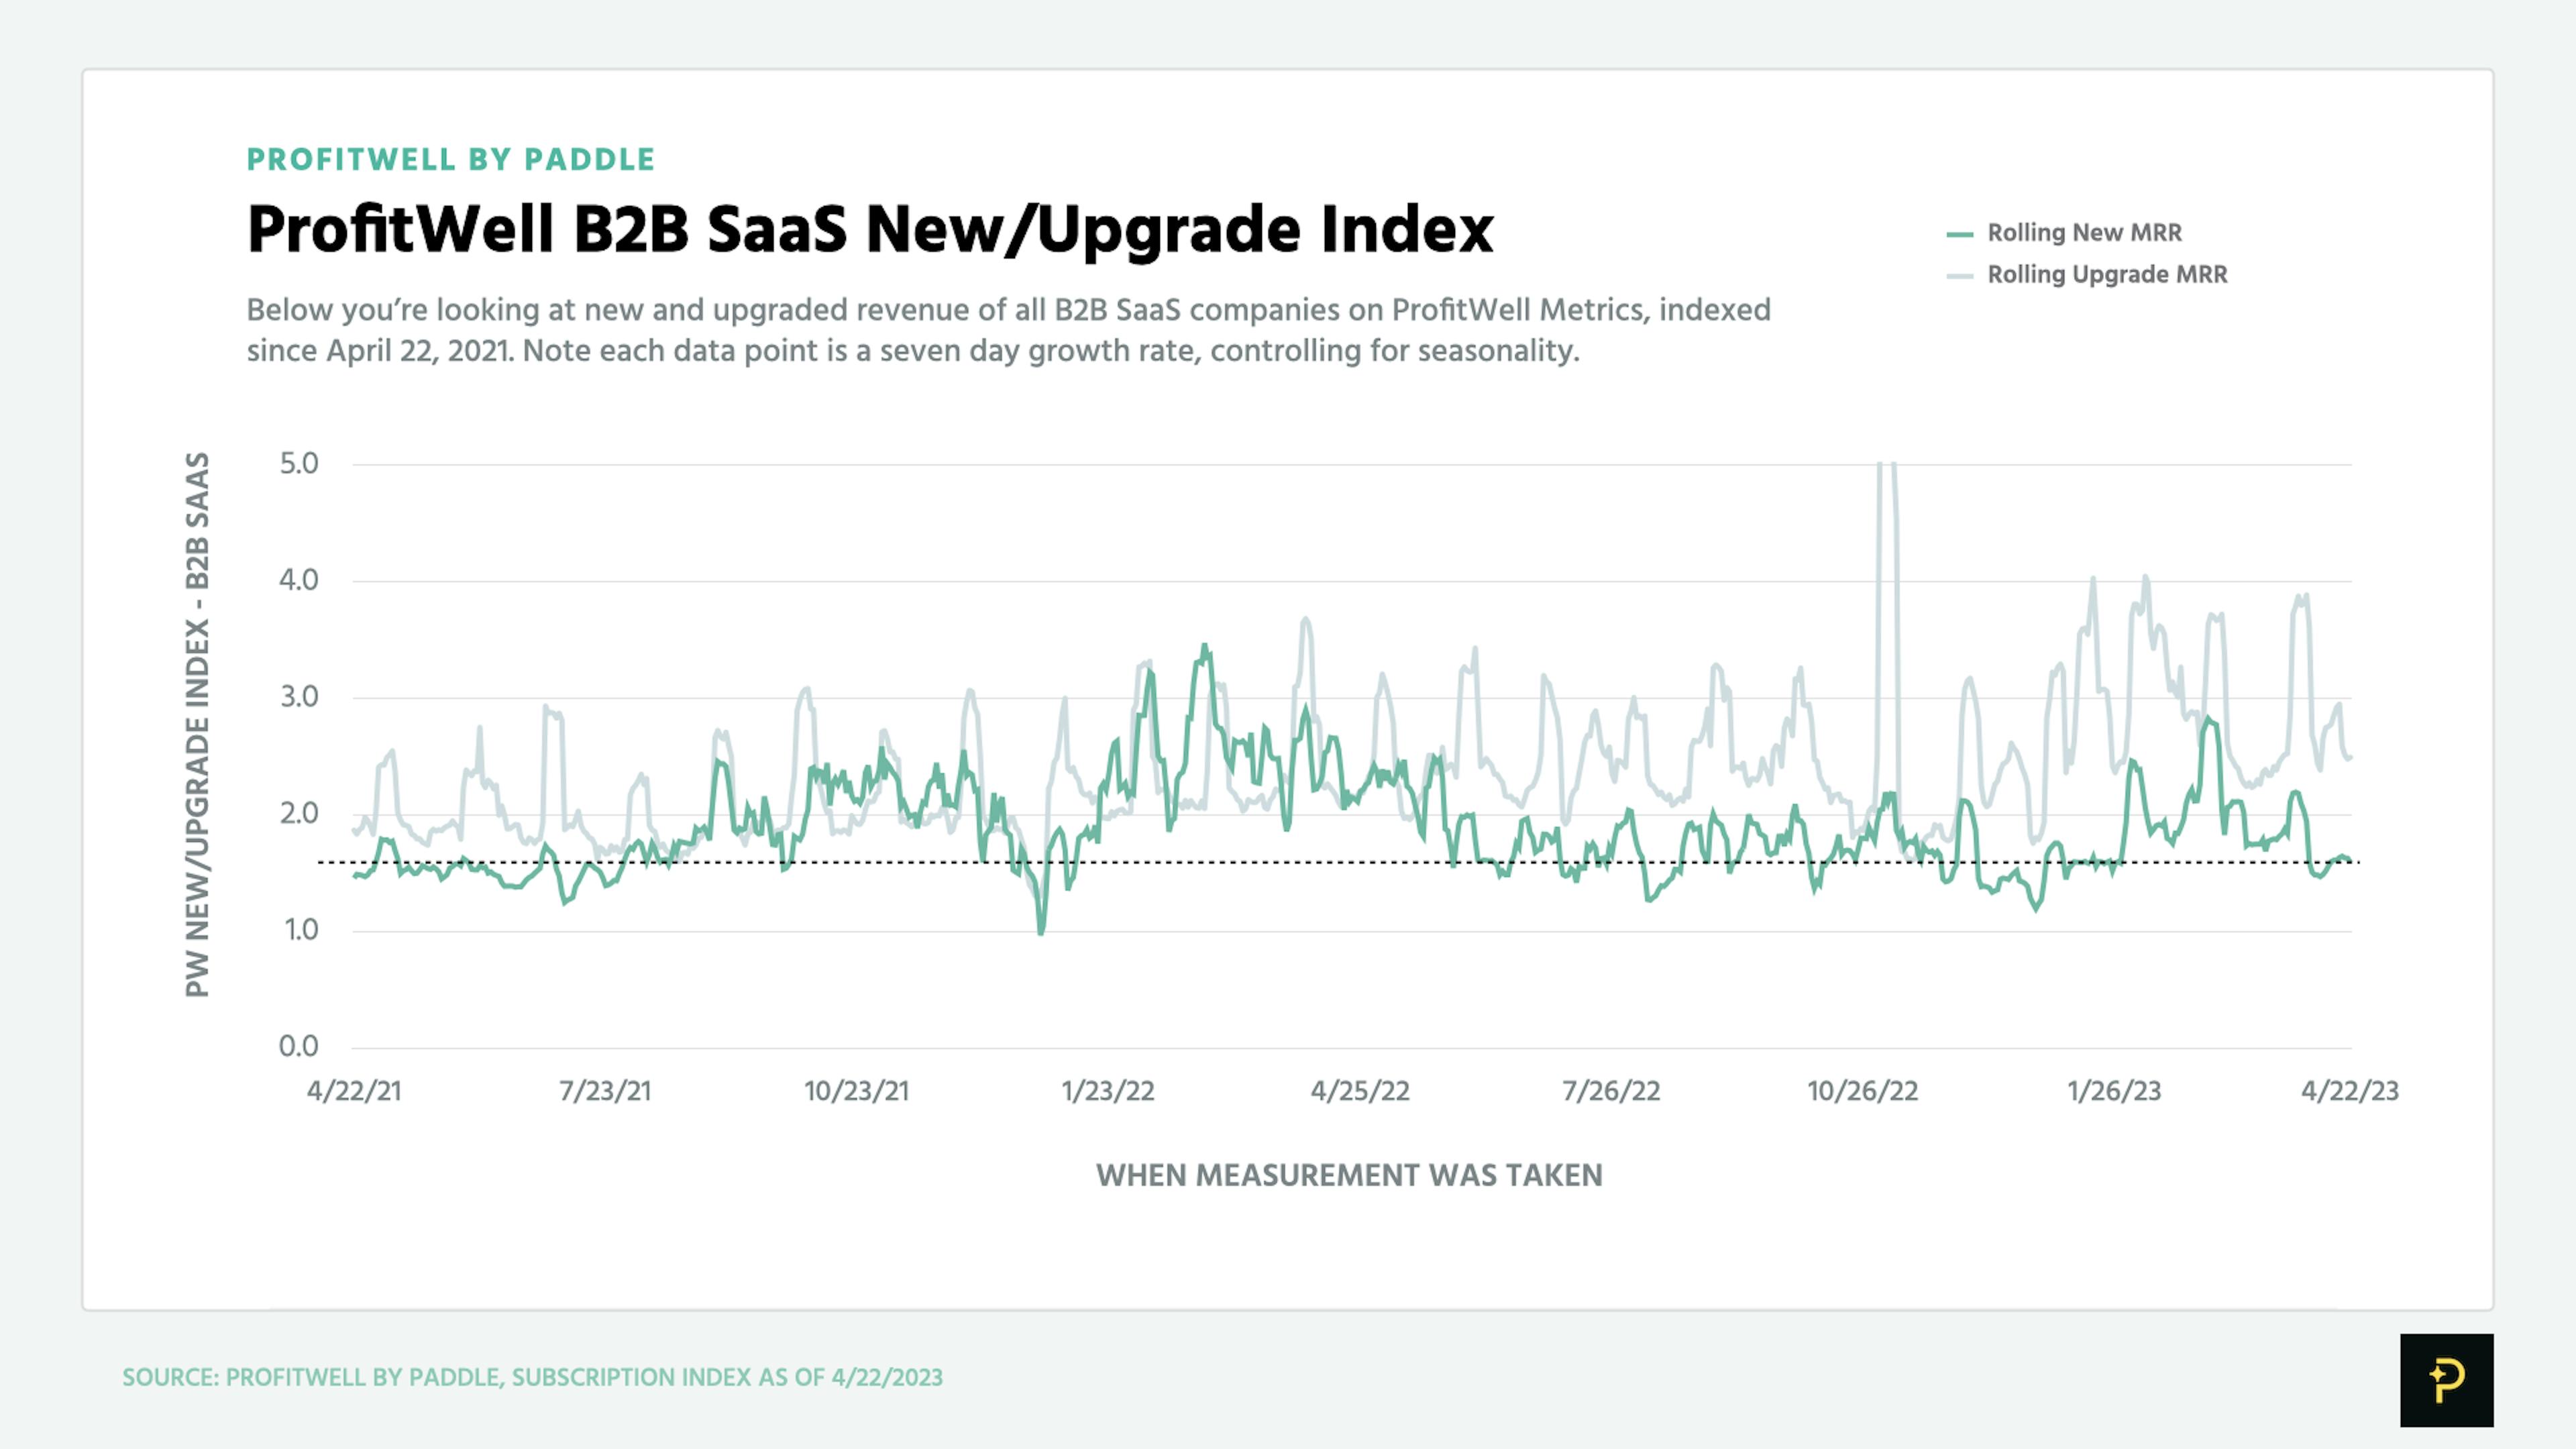 Chart of the ProfitWell B2B SaaS New/Upgrade Index, showing net new sales moderately slowing from Q1 2023.